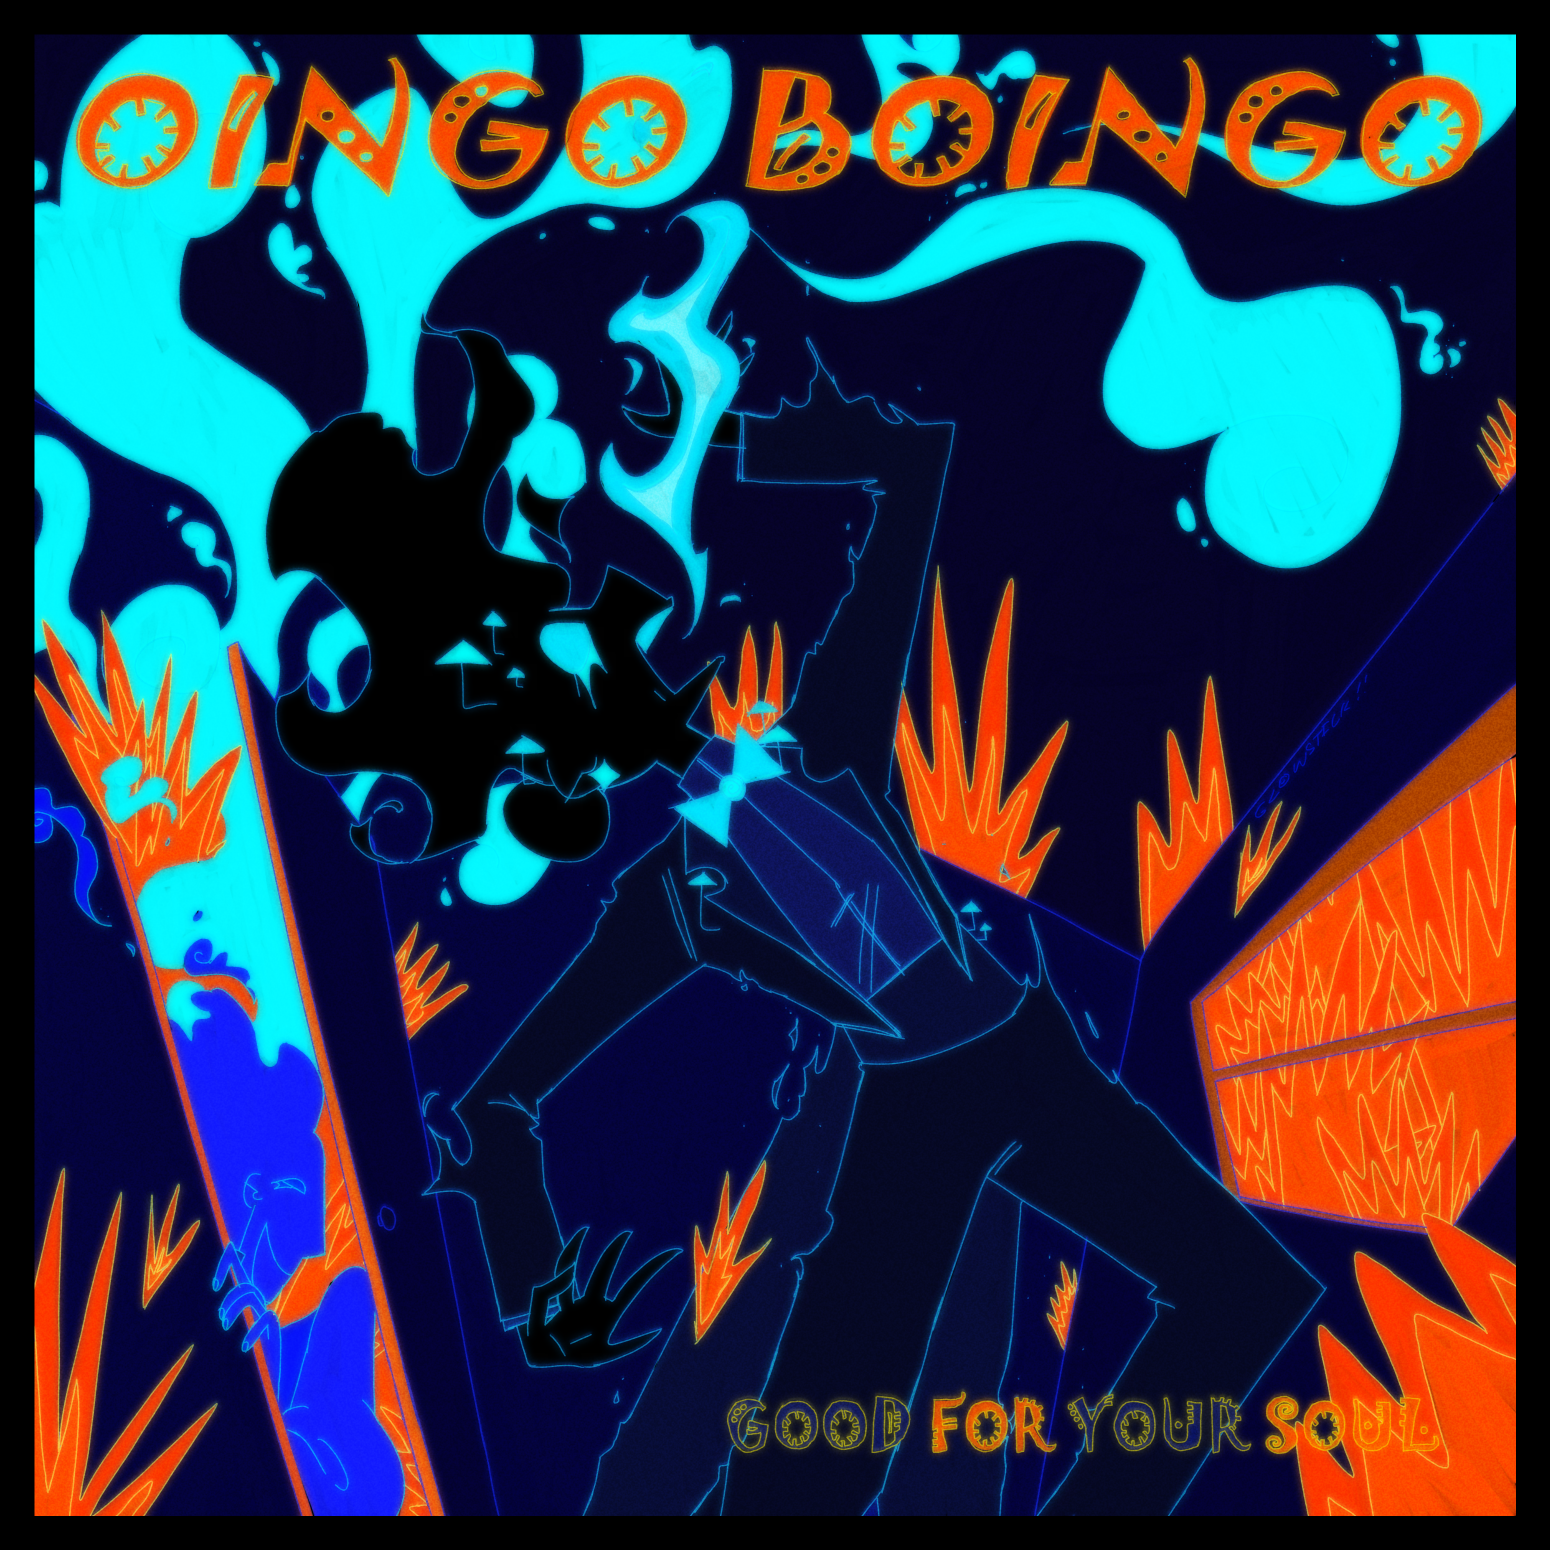 A redraw of the album cover of Good For Your Soul by Oingo Boingo. There is a shadow-y girl breathing cyan fire, and behind the door to her left is a smiling man. The room is filled with red flames.